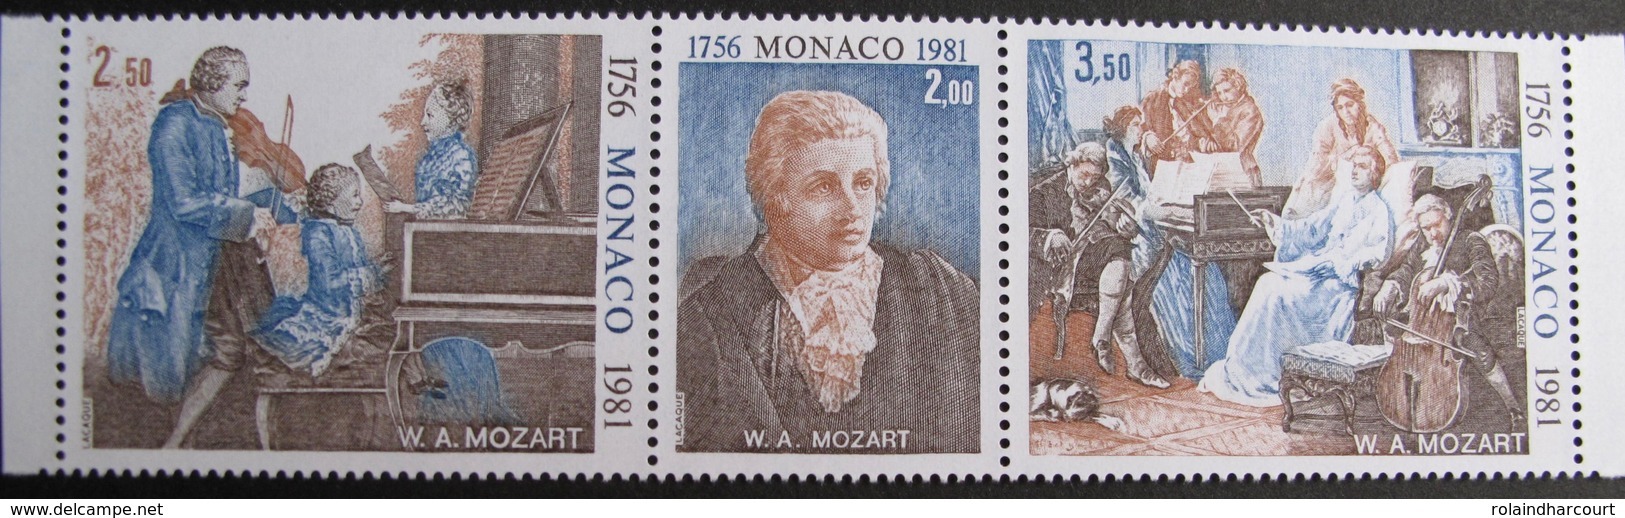 FD/2687 - MONACO - MOZART (1756-1791) - N°T1272A TIMBRES NEUFS** - Cote : 11,00 € - Unused Stamps